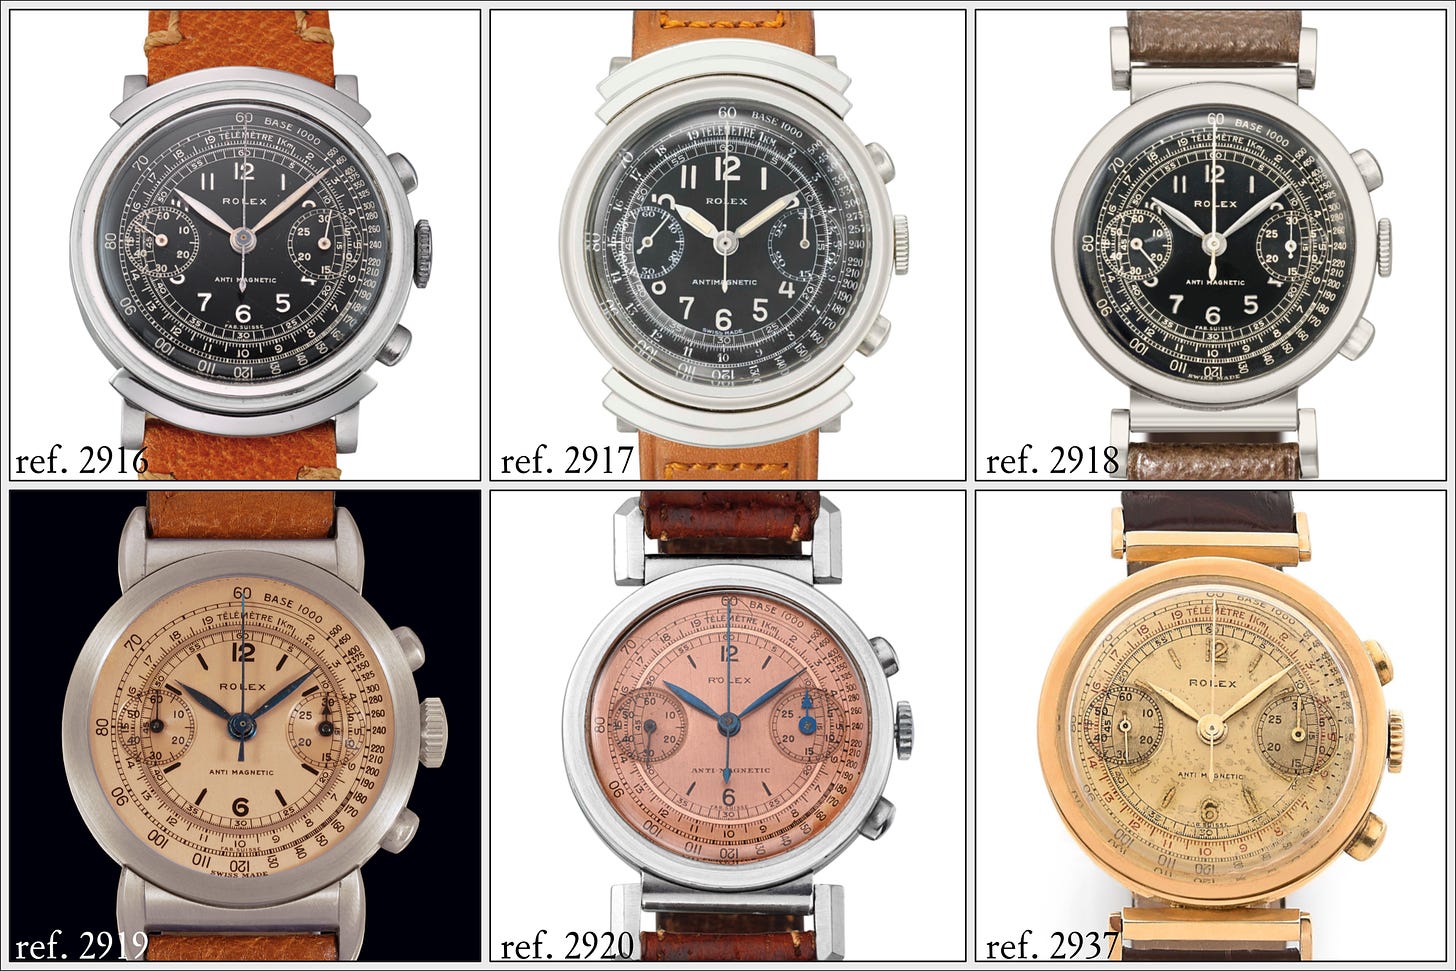 All six experimental Rolex chronograph references from 1937 - refs. 2916, 2917, 2918, 2919, 2920, 2937